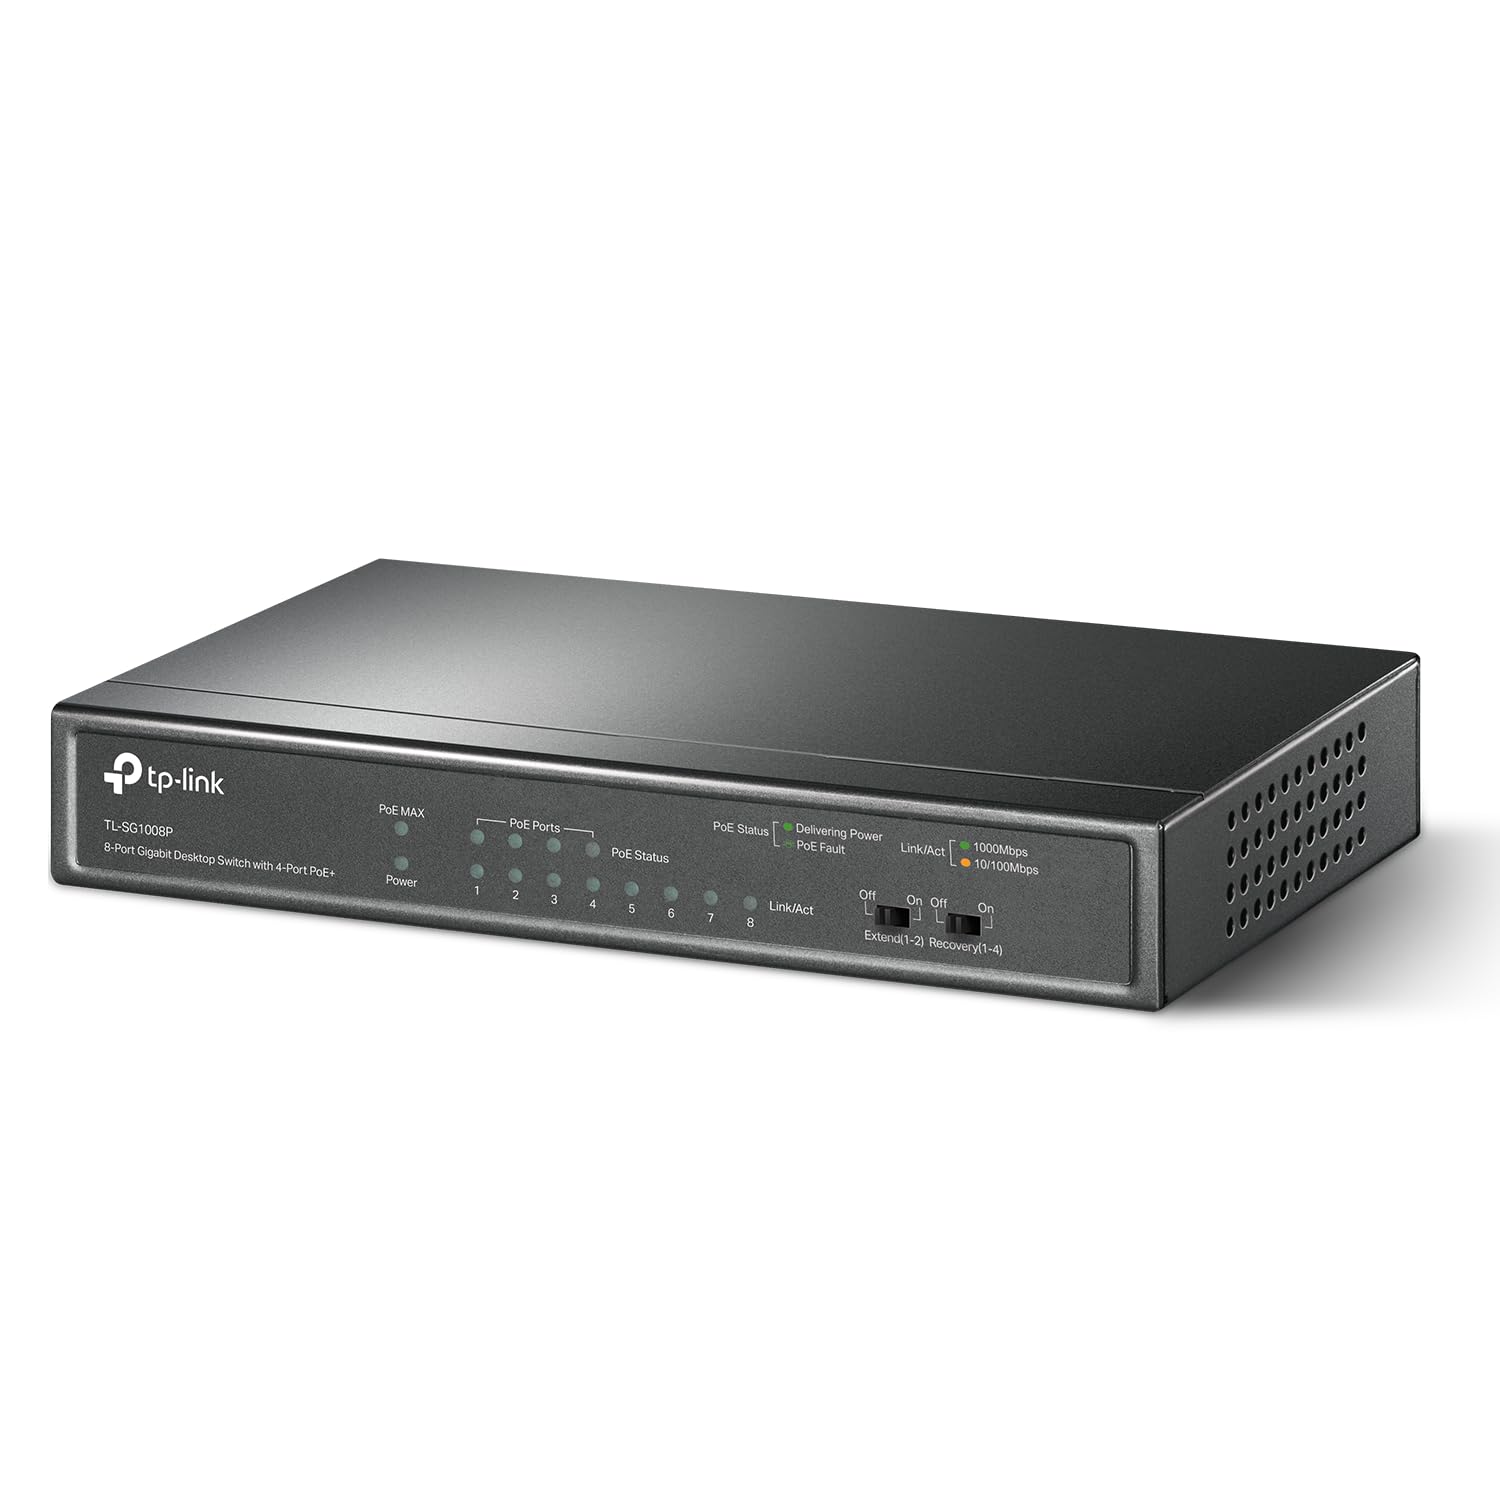 grand escompte TP-Link PoE Switch 8-Port Gigabit, 4 PoE+ Ports up to 30 W For Each PoE Port and 64 W For All PoE Ports, Metal Casing, Plug and Play, Ideal for IP Surveillance and Access Point(TL-SG1008P) ph6TlbvkM Vente chaude